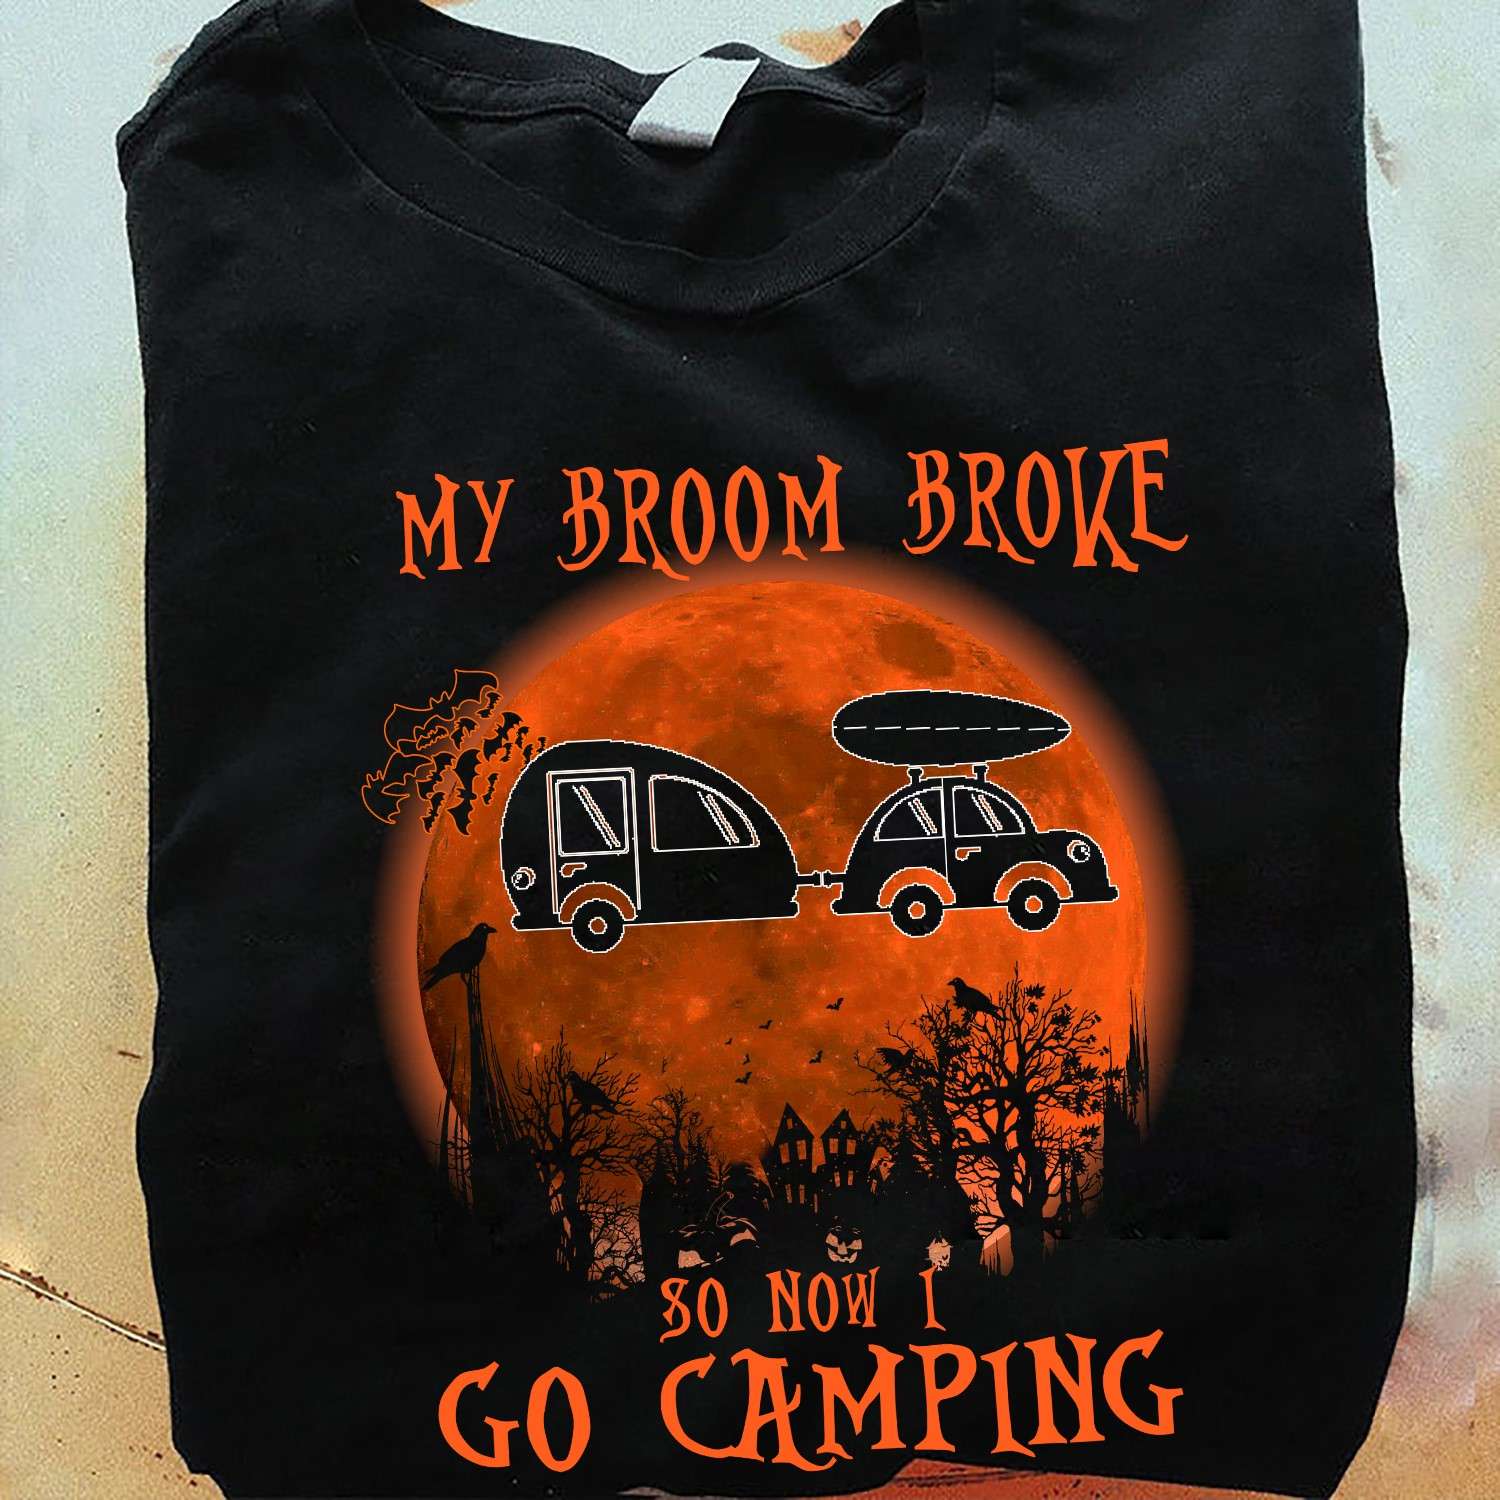 My broom broke so now I go camping - Recreational vehicle, camping witch